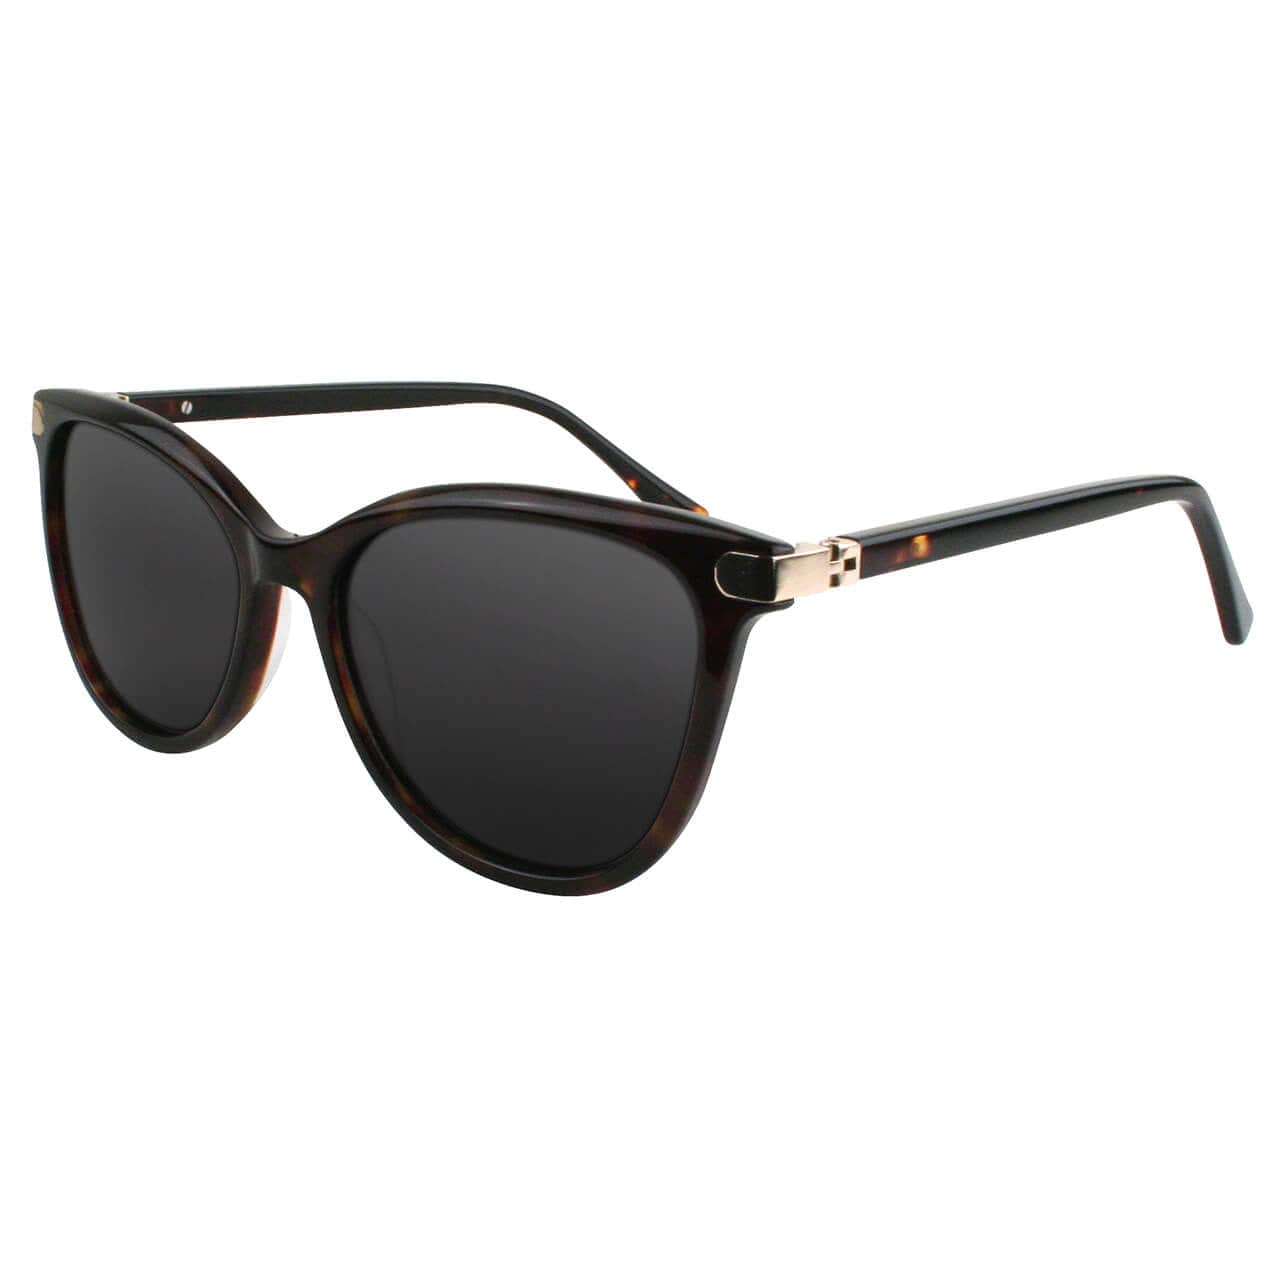 Solect Flare Sunglasses with Tortoise Frame and Gray Polarized Lenses